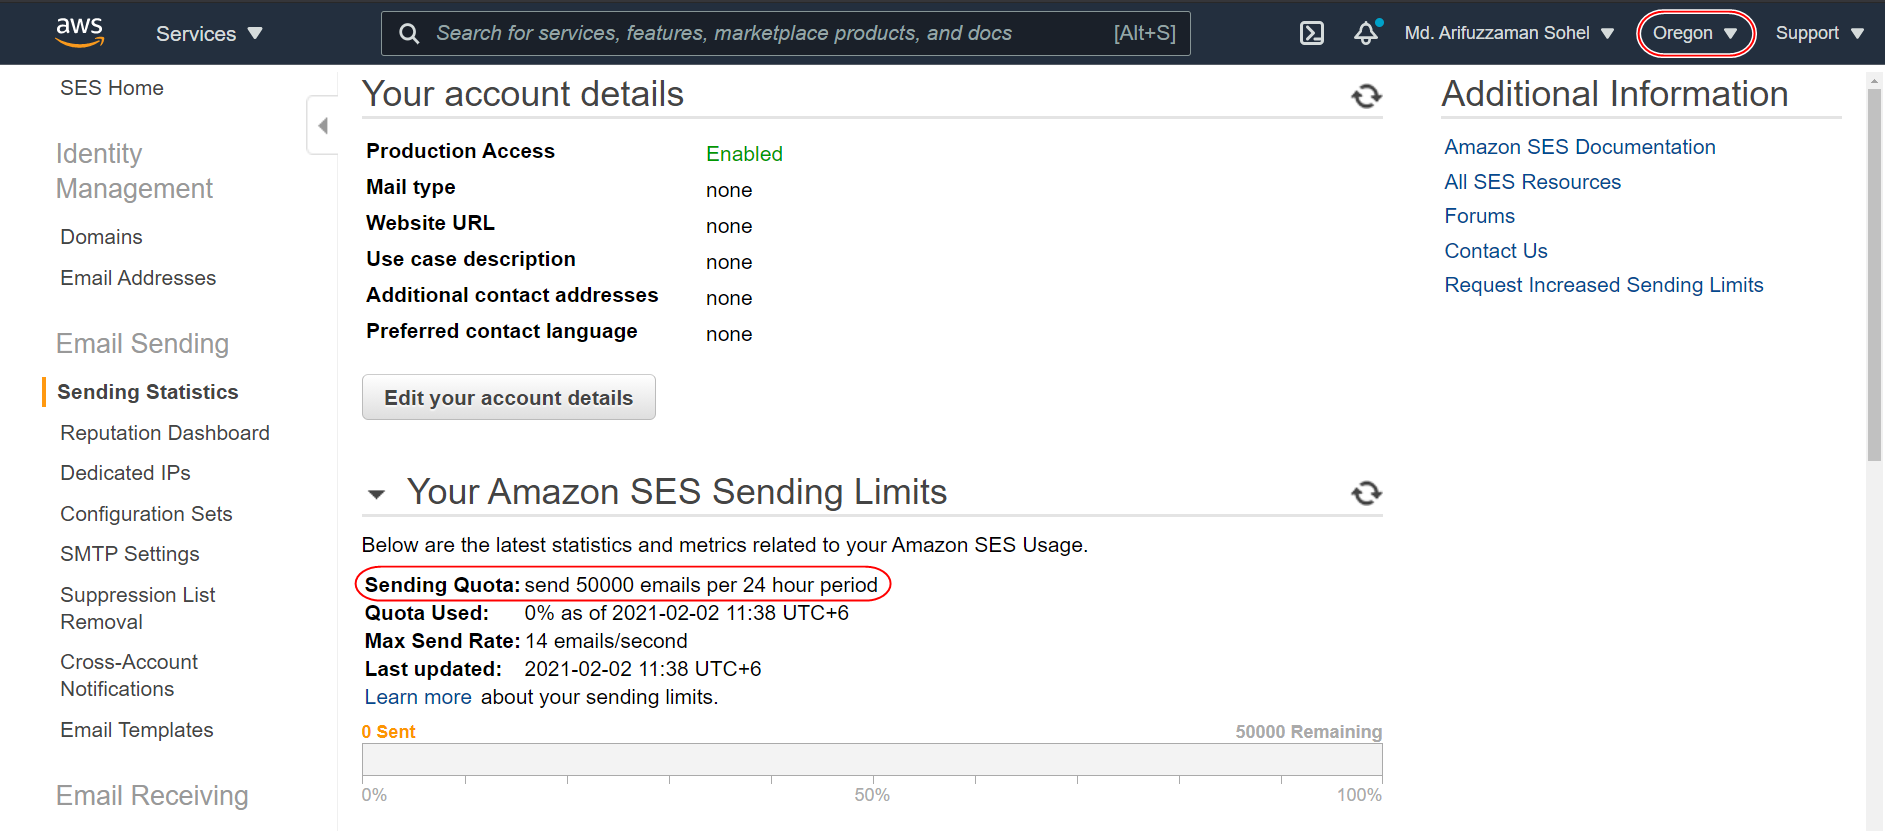 AWS account details and sending limits